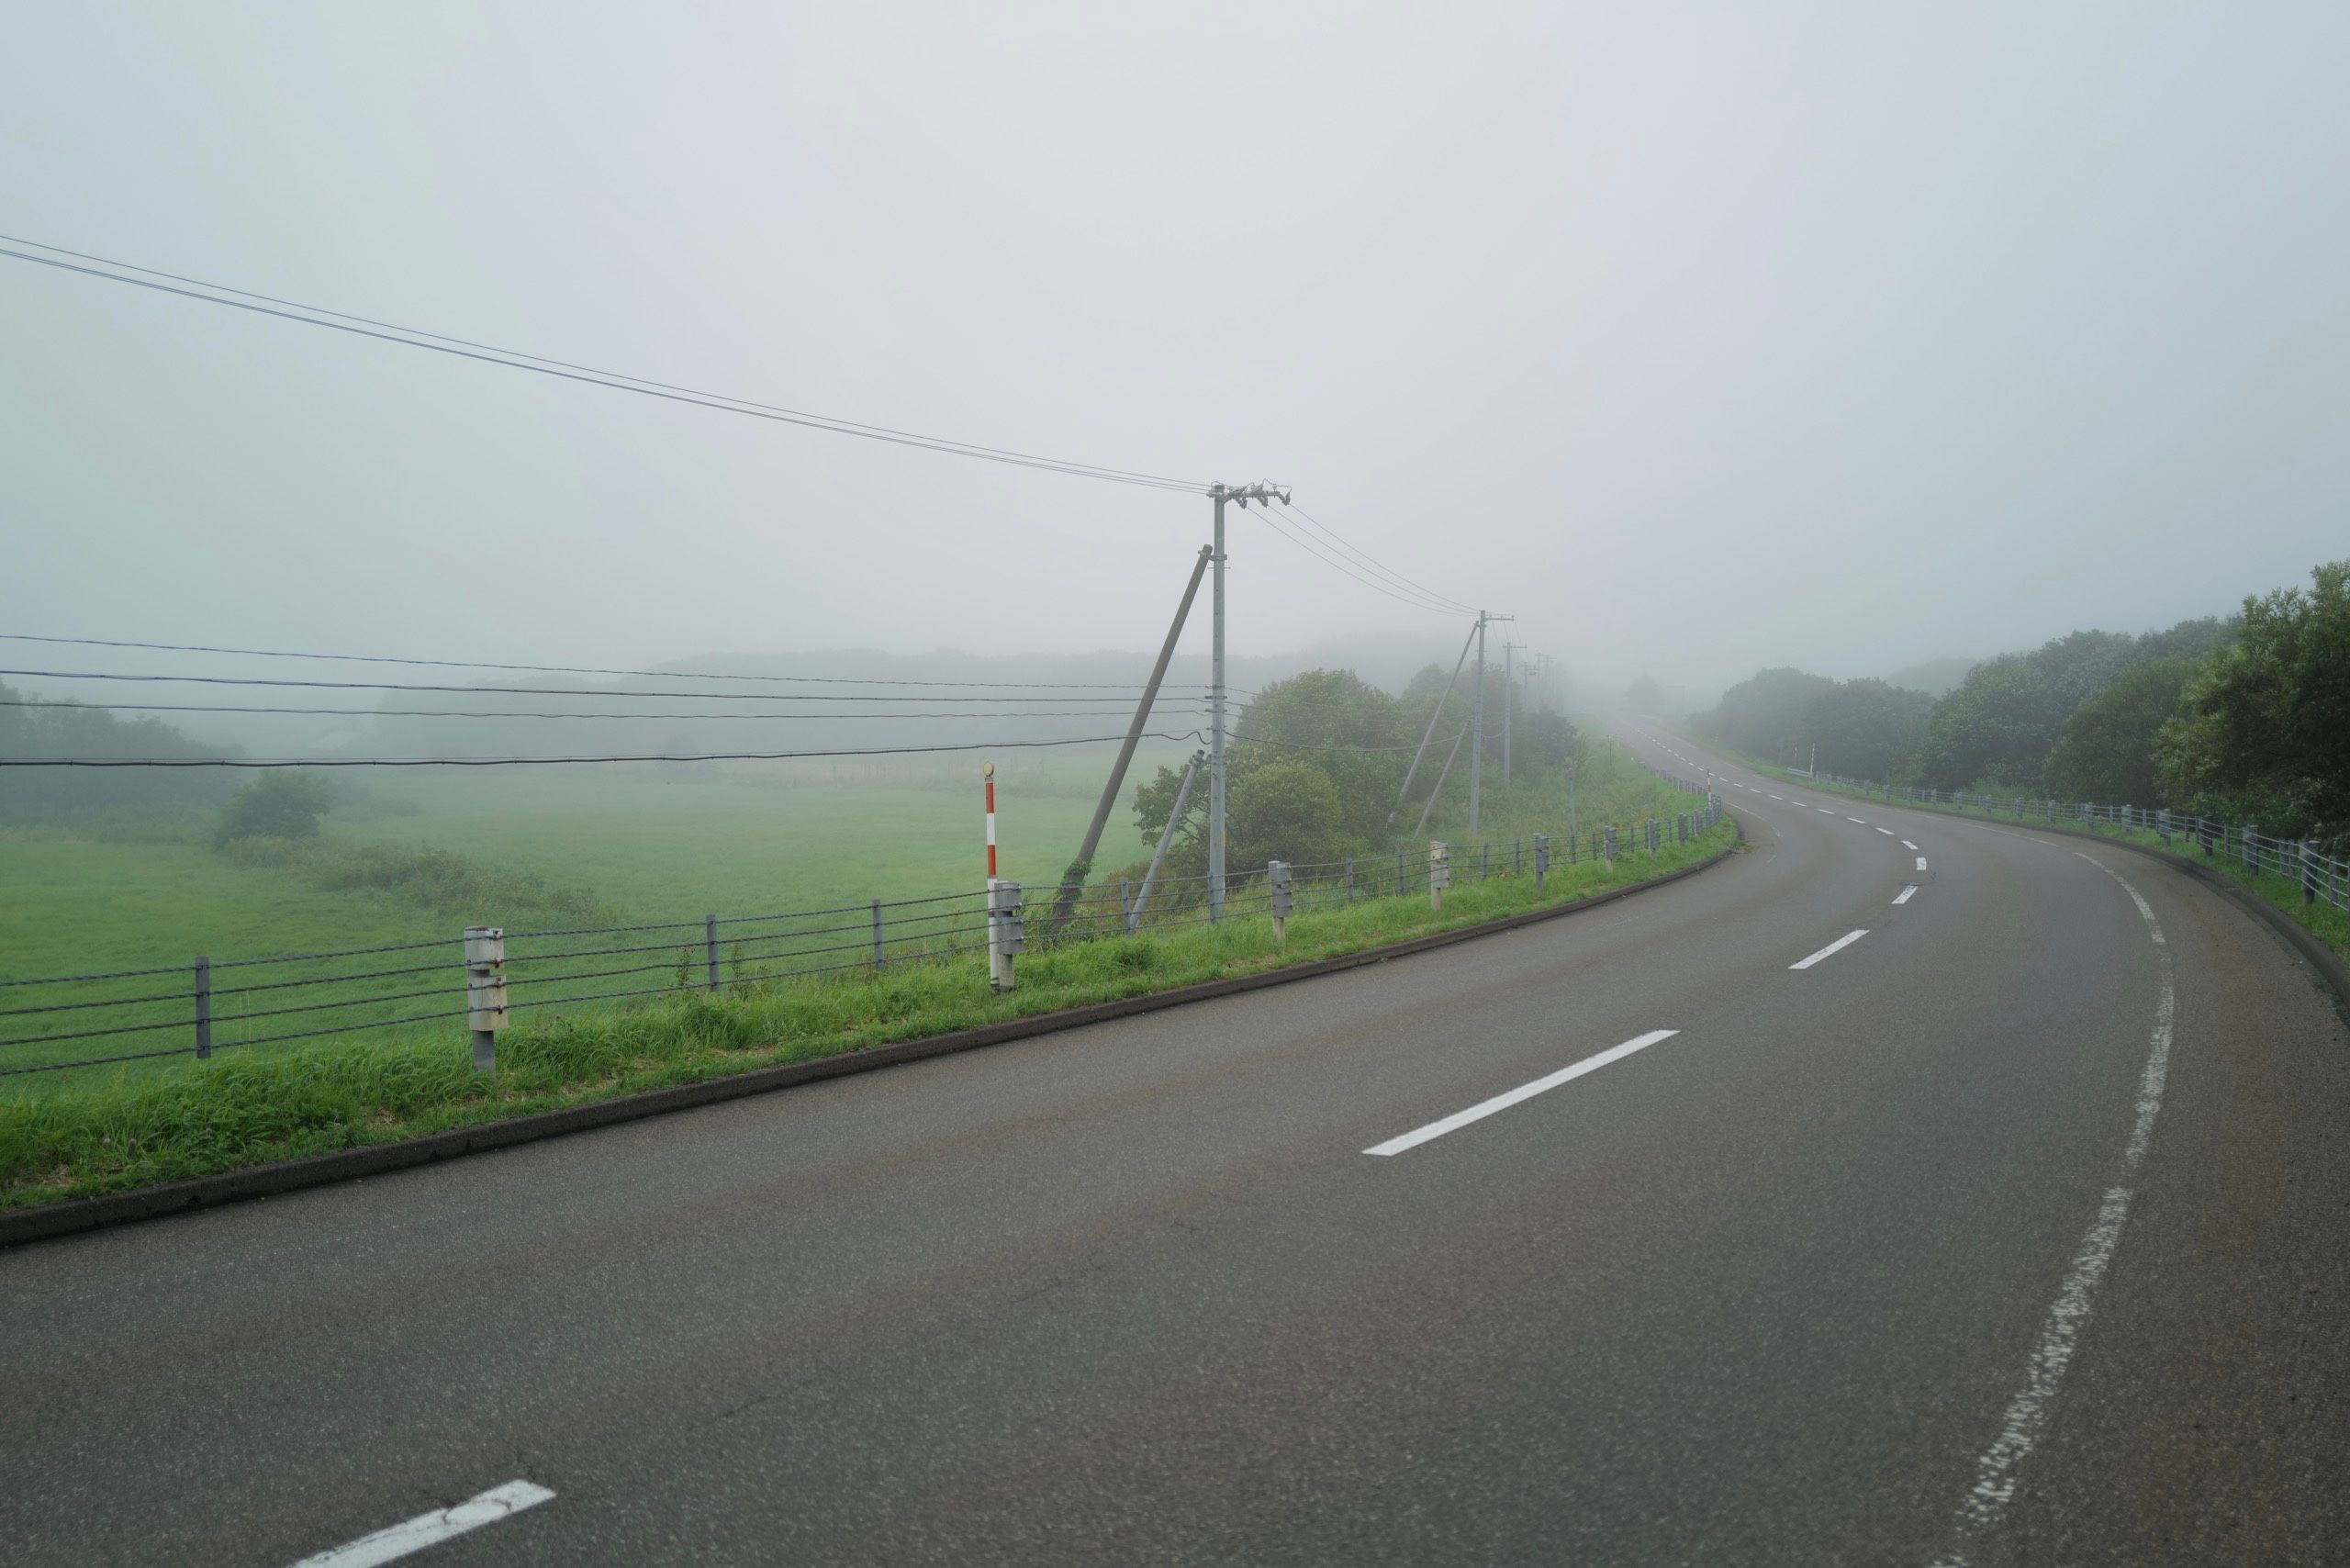 An empty road in a foggy landscape.